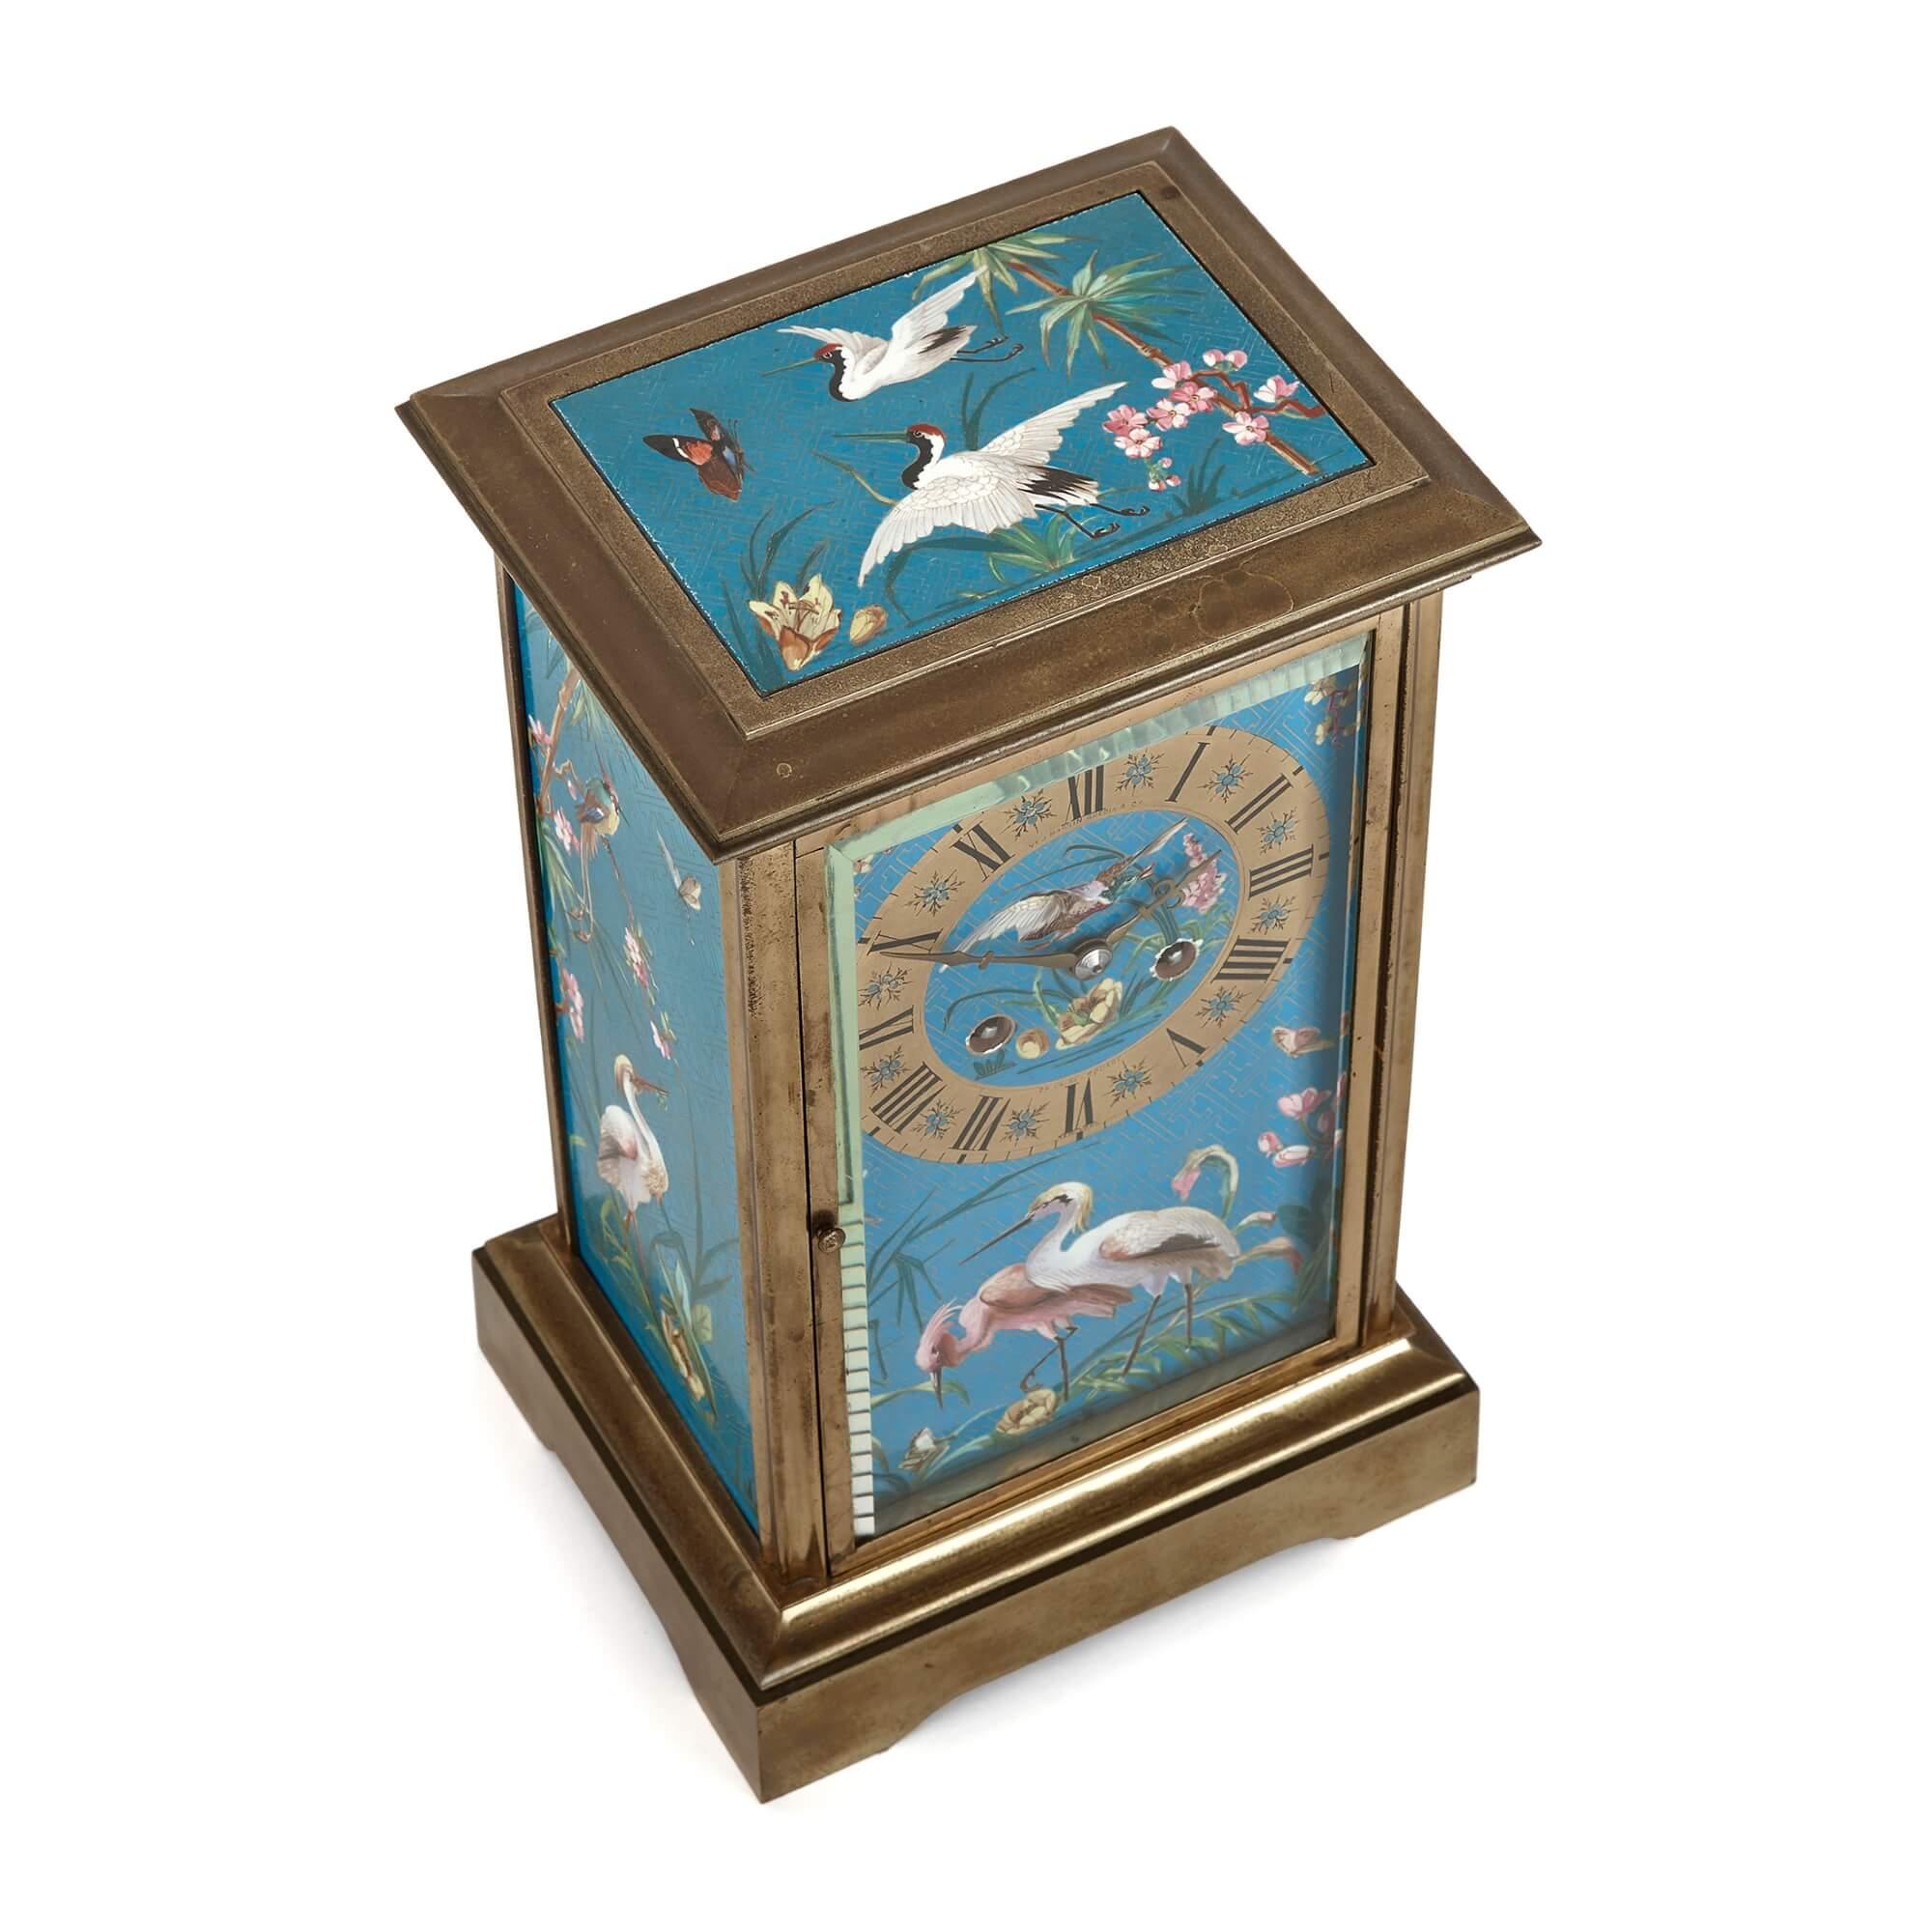 French Japonisme style gilt bronze and enamel mantel clock
French, 19th Century
Height 30cm, width 18cm, depth 14.5cm

This fine mantel clock is of rectangular form, with a gilt bronze frame formed in an architectural manner. The four sides and the